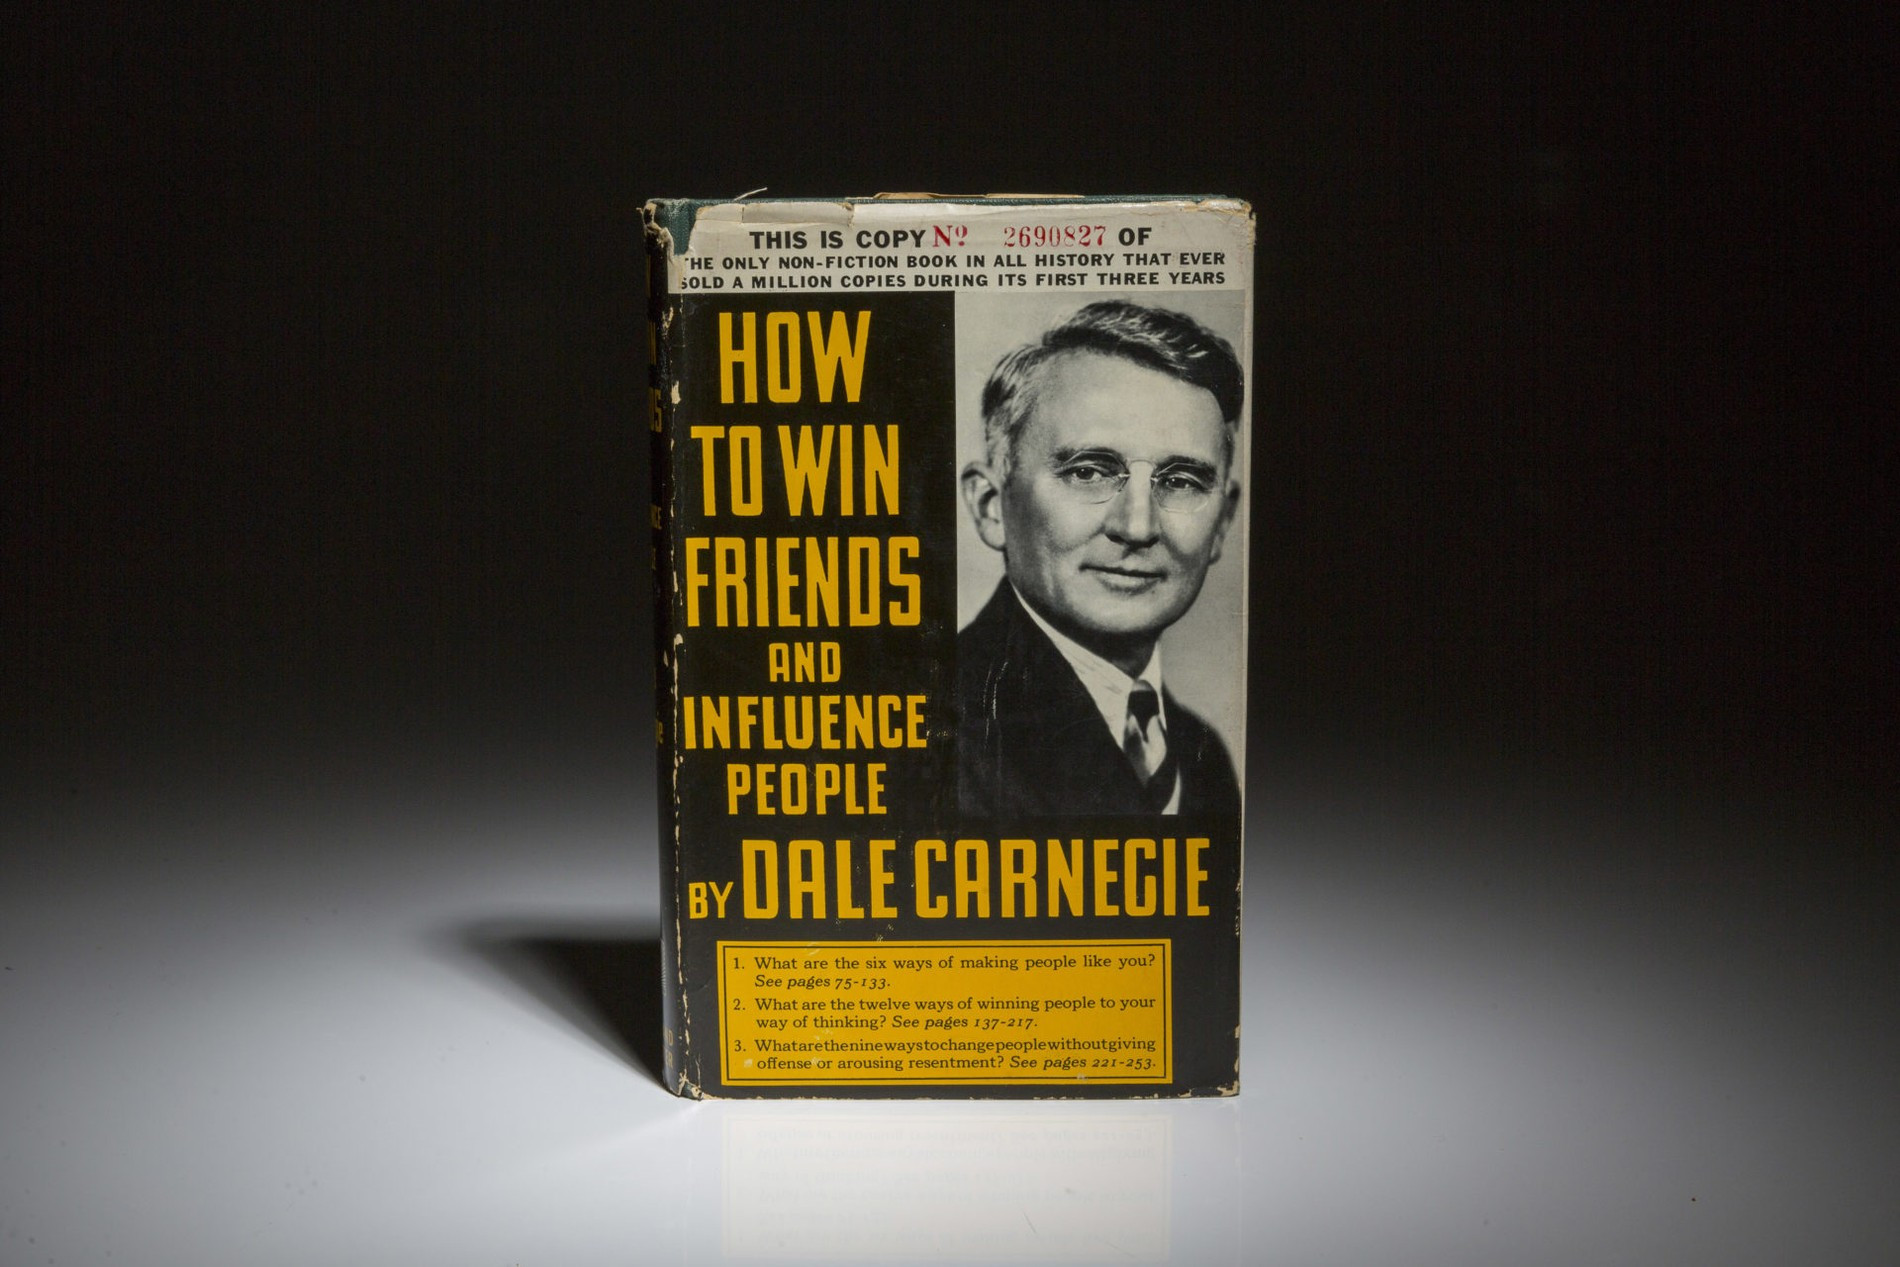 How to win friends and influence people by Dale Carnegie. Дейл Карнеги how to win friends and influence people. How to win friends and influence people книга. Дейл Карнеги ораторское искусство.